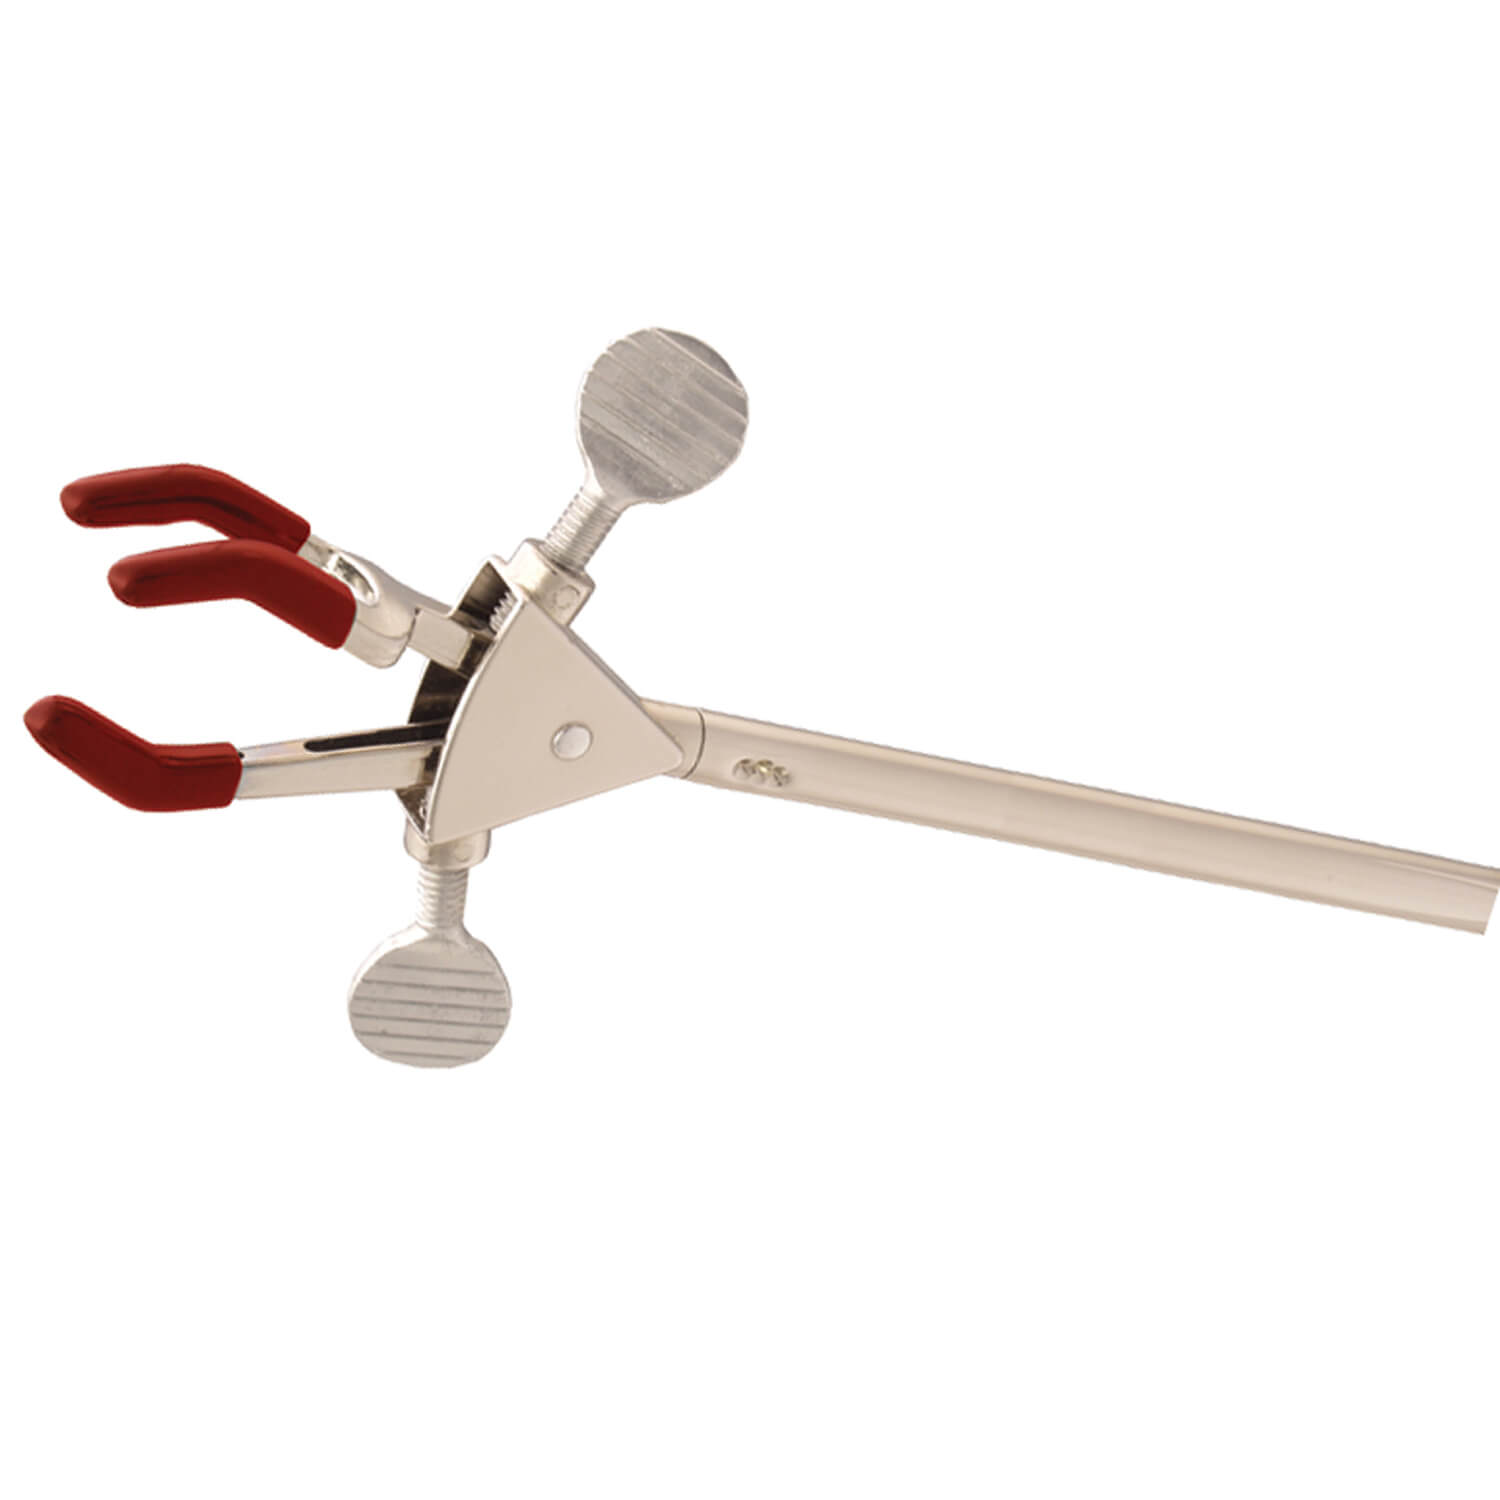 OHAUS LABJAWS CLAMPS & SUPPORTS MULTI PURPOSE CLAMPS A LabJaws Clamp for Every Application - Choose From Over 85 Options to Hold Everything In Your Lab